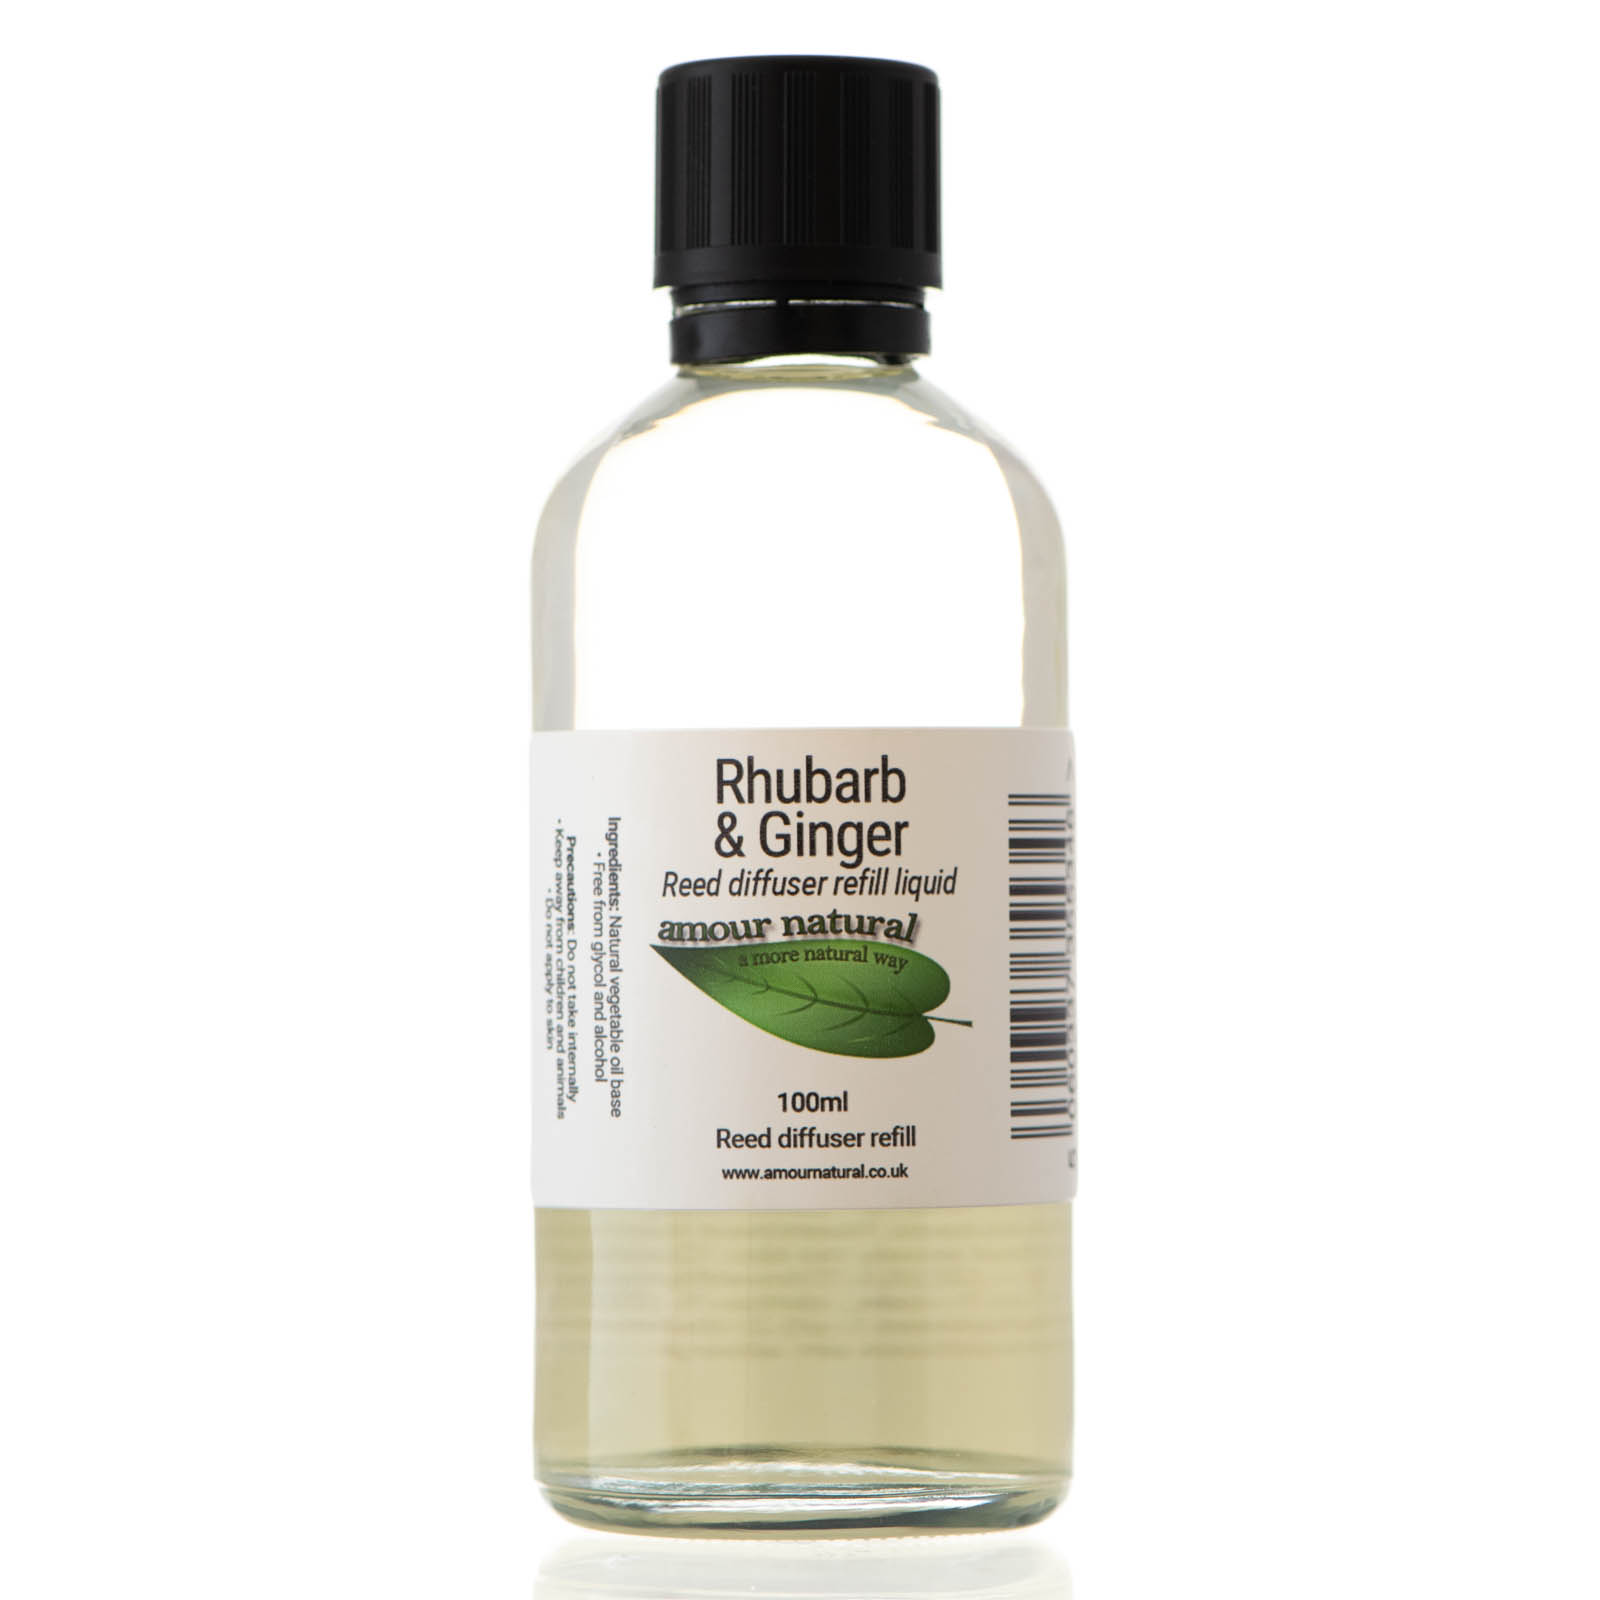 Rhubarb and Ginger reed diffuser refill (bottle only)